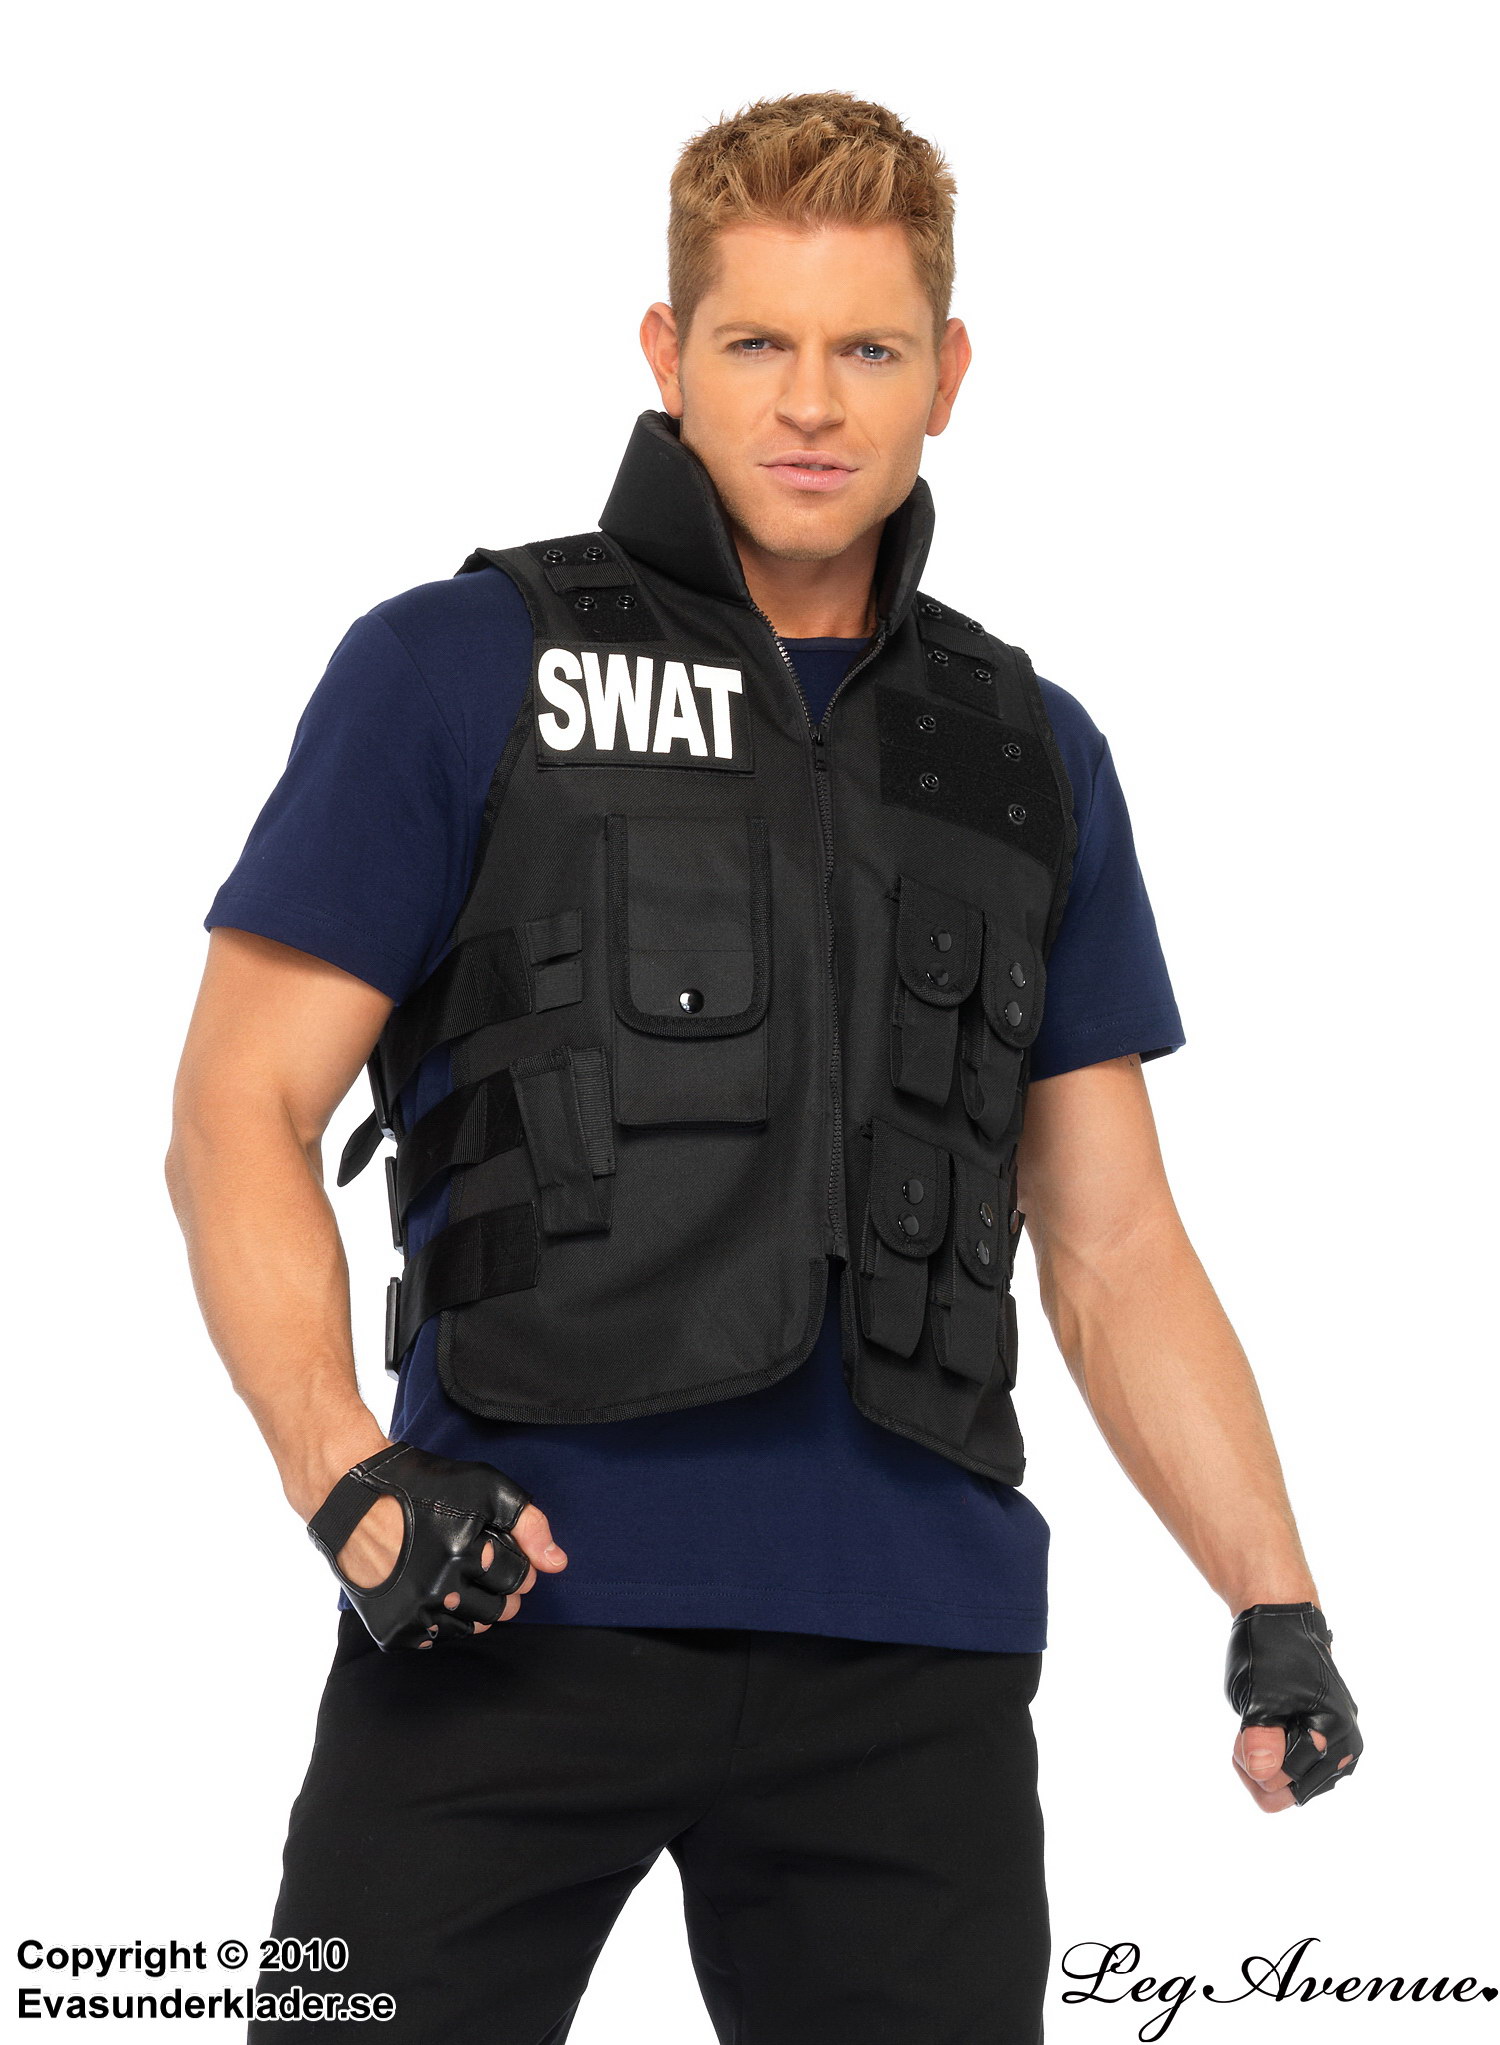 SWAT officer, costume vest, matching accessories